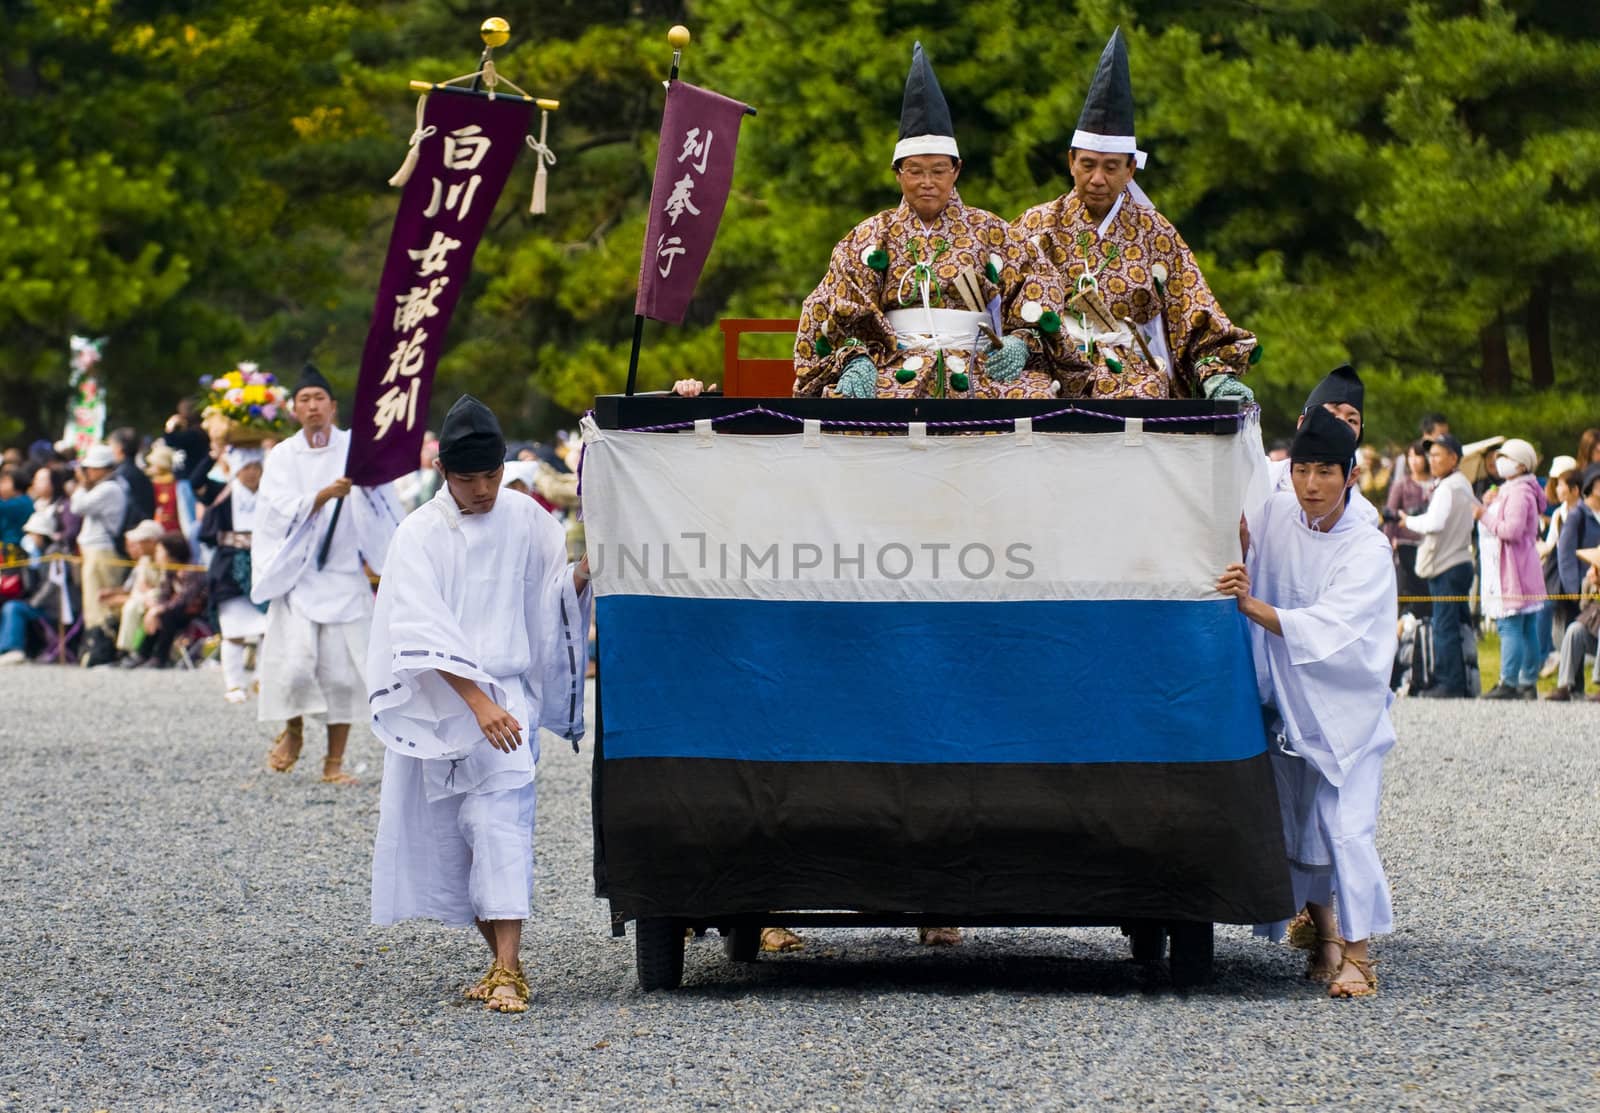 Kyoto, OCT  22: a participants on The Jidai Matsuri ( Festival of the Ages) held on October 22 2009  in Kyoto, Japan . It is one of Kyoto's renowned three great festivals